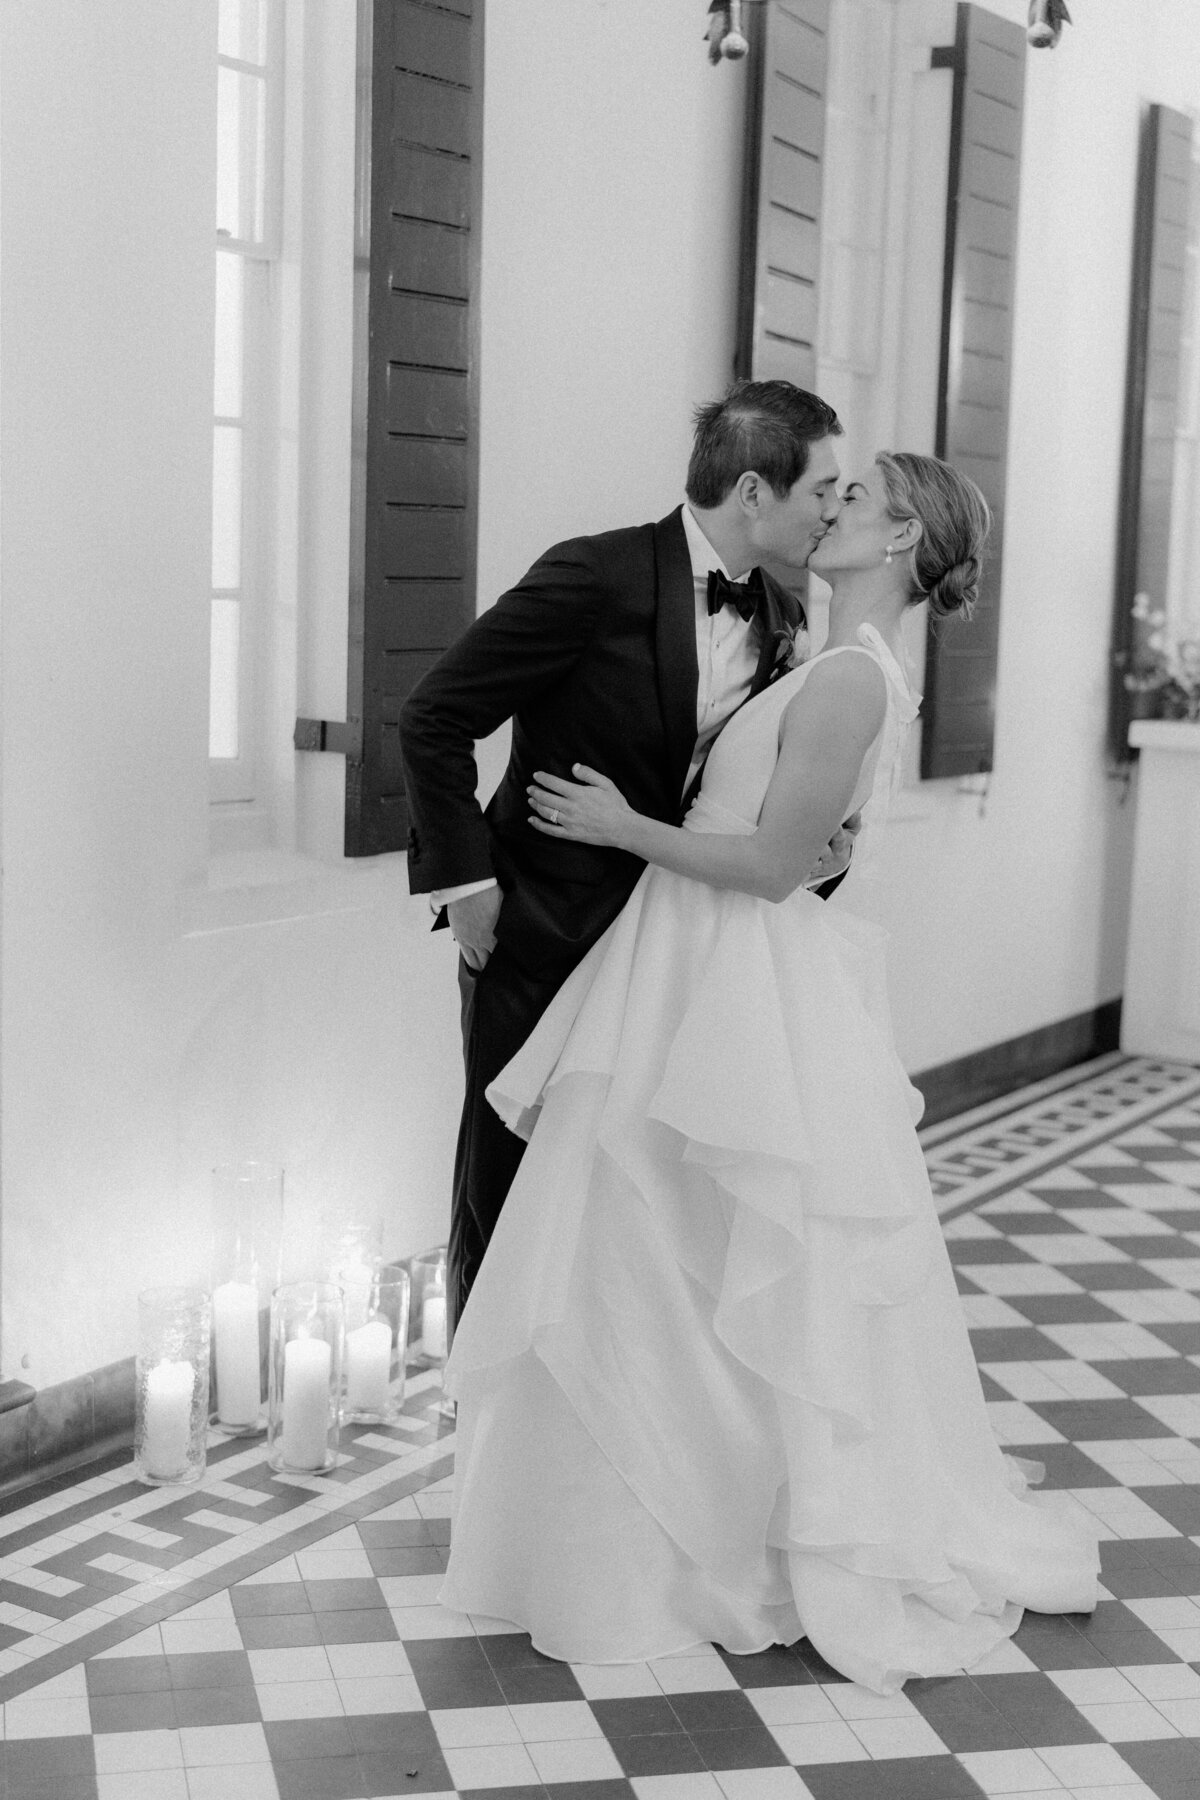 Spring Lowndes Grove wedding. Bride and groom kiss on checkerboard floor. Black and white wedding photo. Kailee DiMeglio Photography.